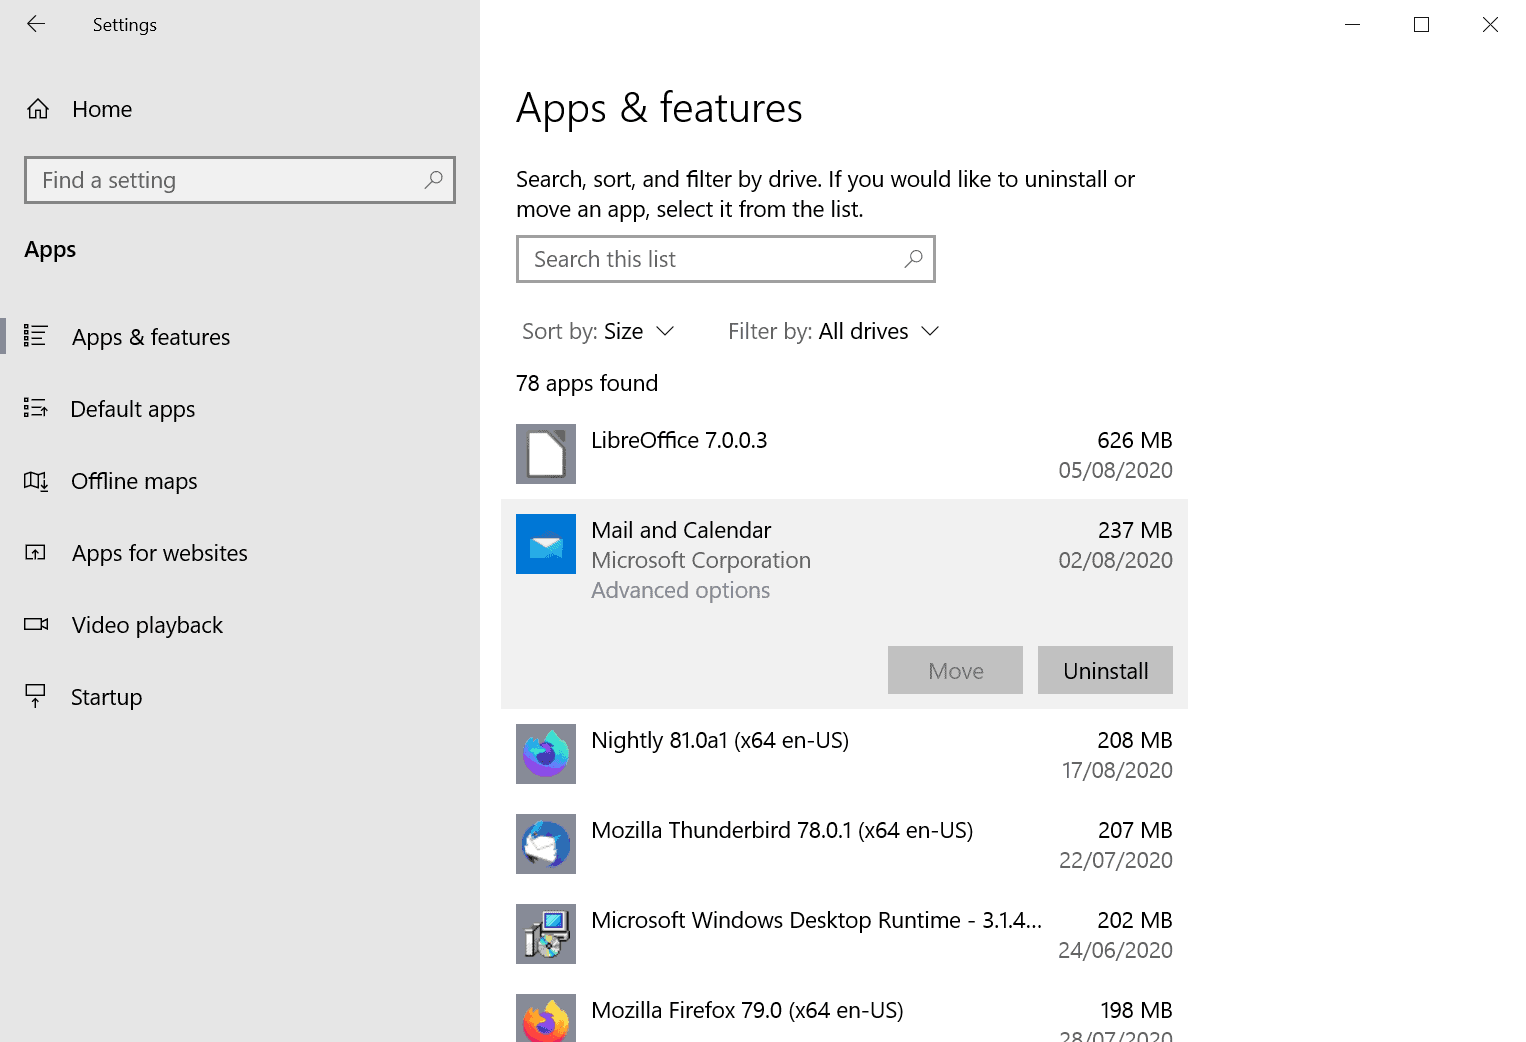 Select "Apps" and then click on "Apps & features".
Scroll through the list of installed programs and select the conflicting software.